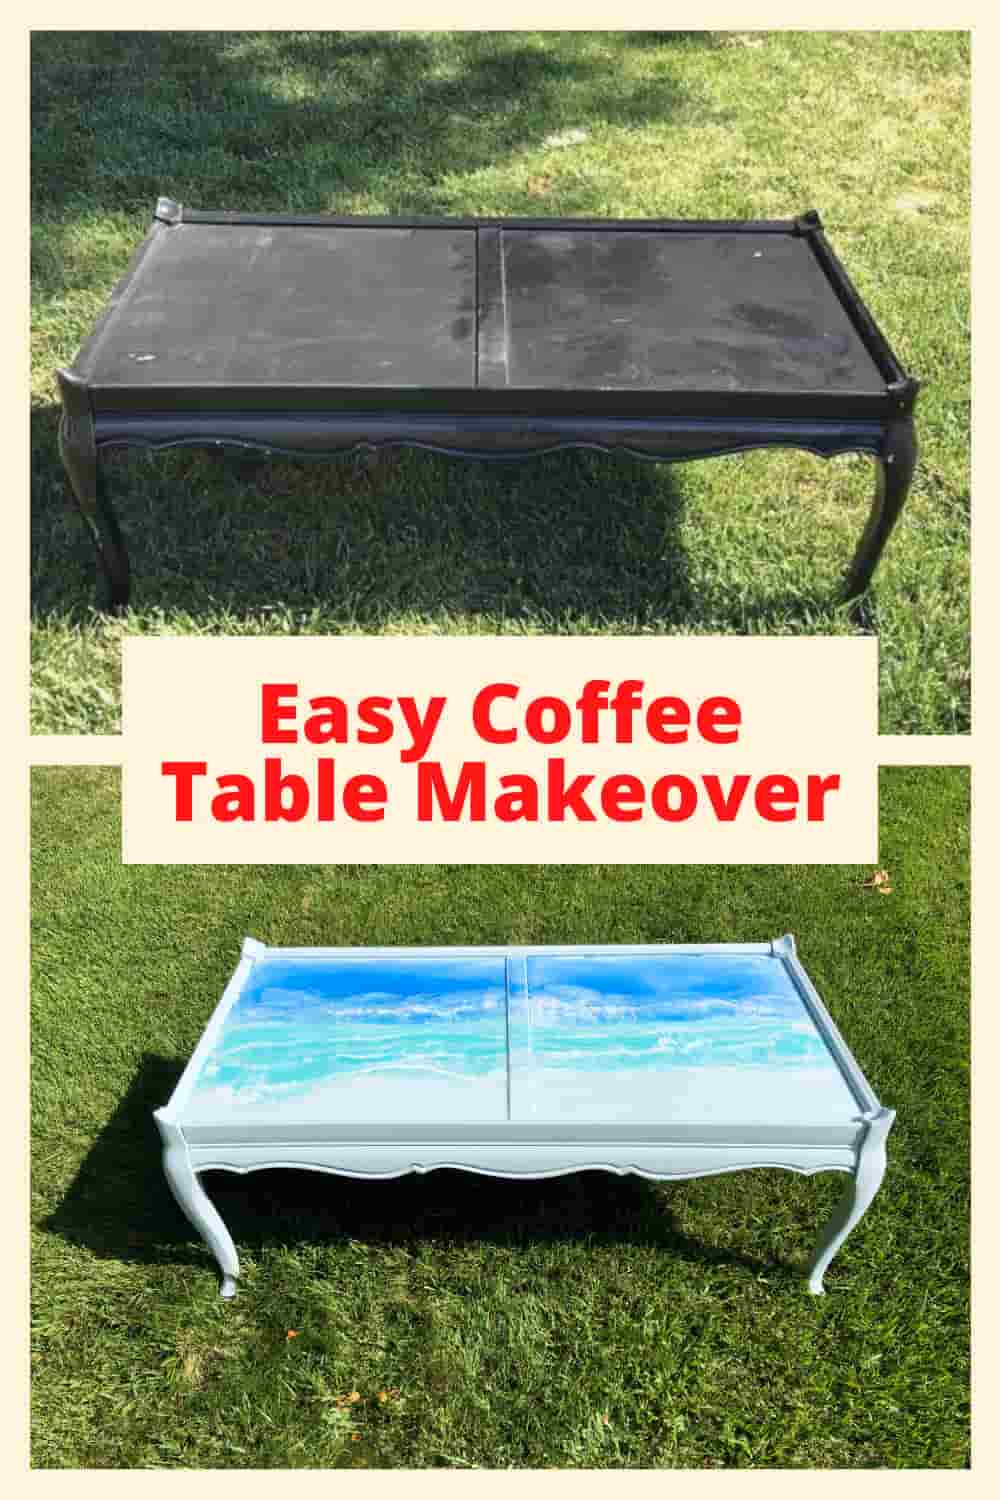 Easy Coffee Table Makeover